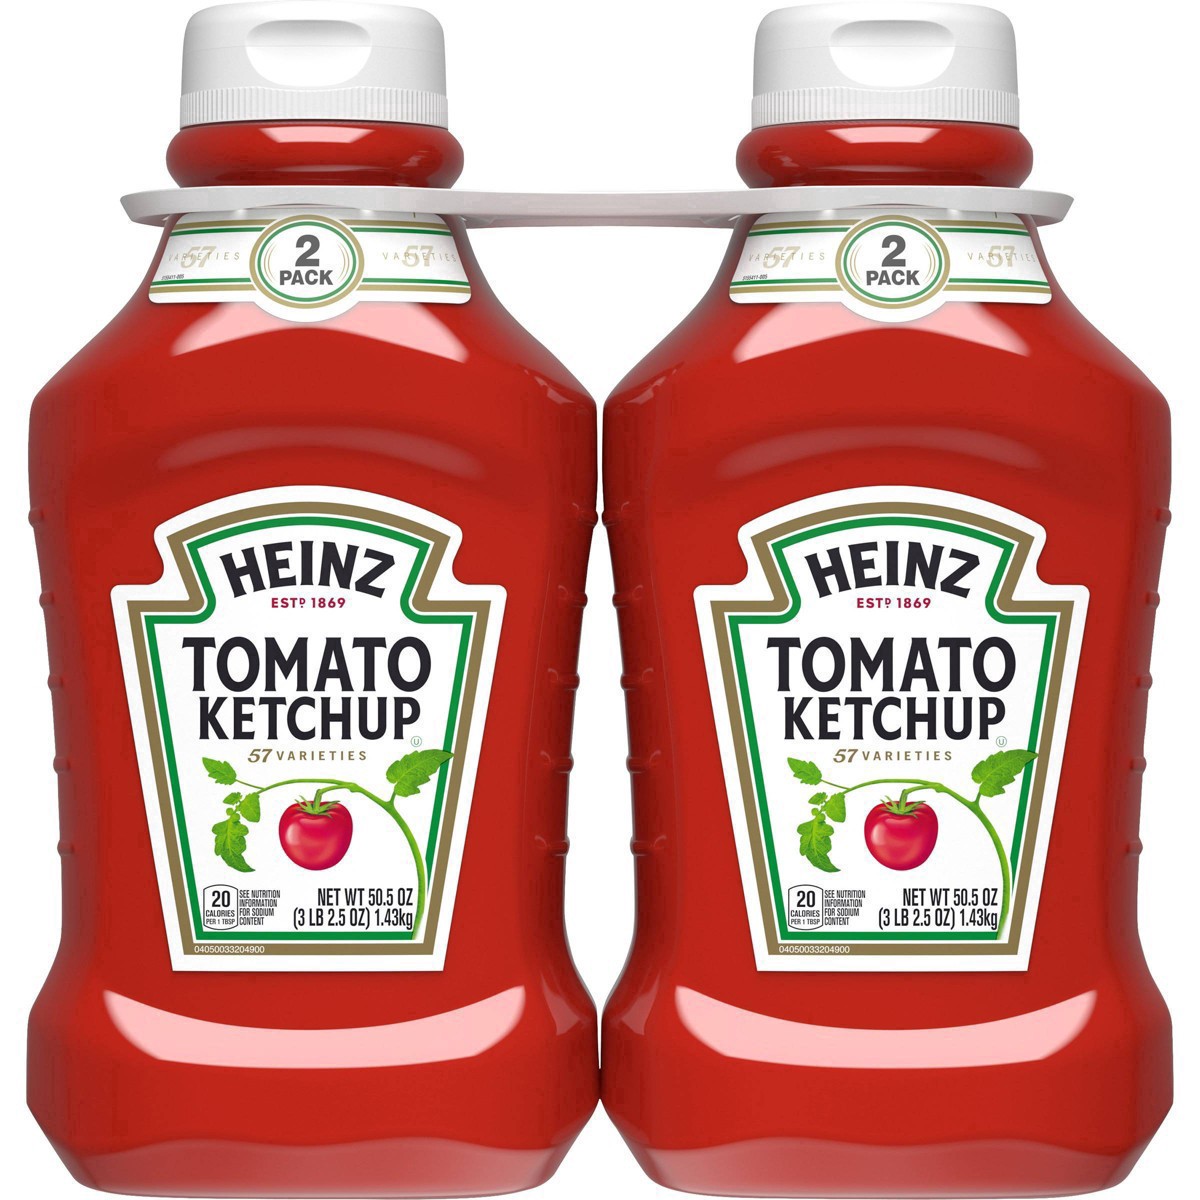 slide 31 of 127, Heinz Tomato Ketchup Pack, 2 ct; 50.5 oz